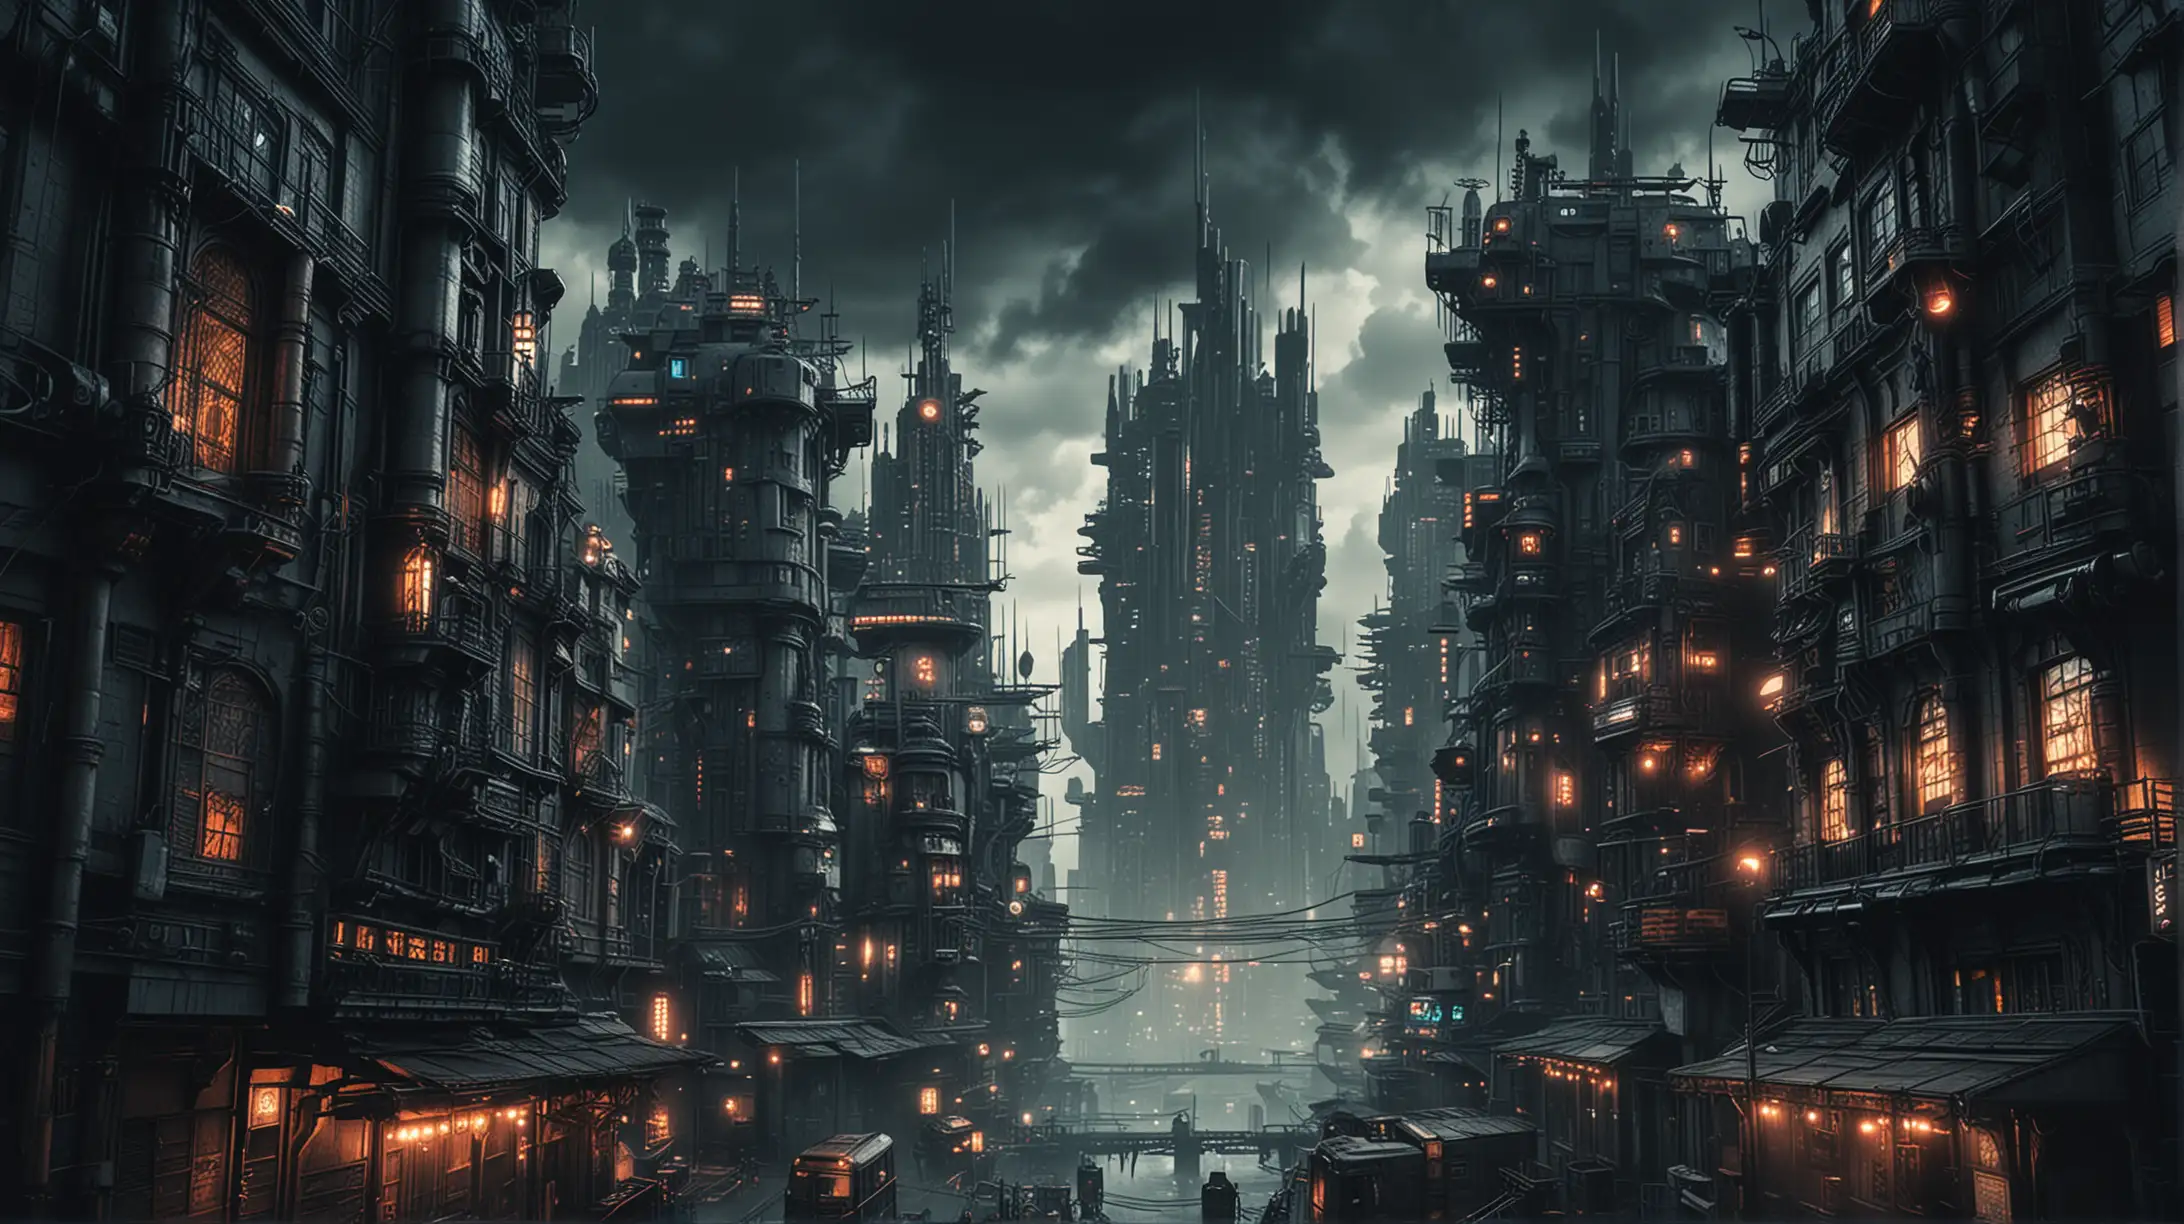 cyberpunk city with buildings in the steampunk style, dark many lights